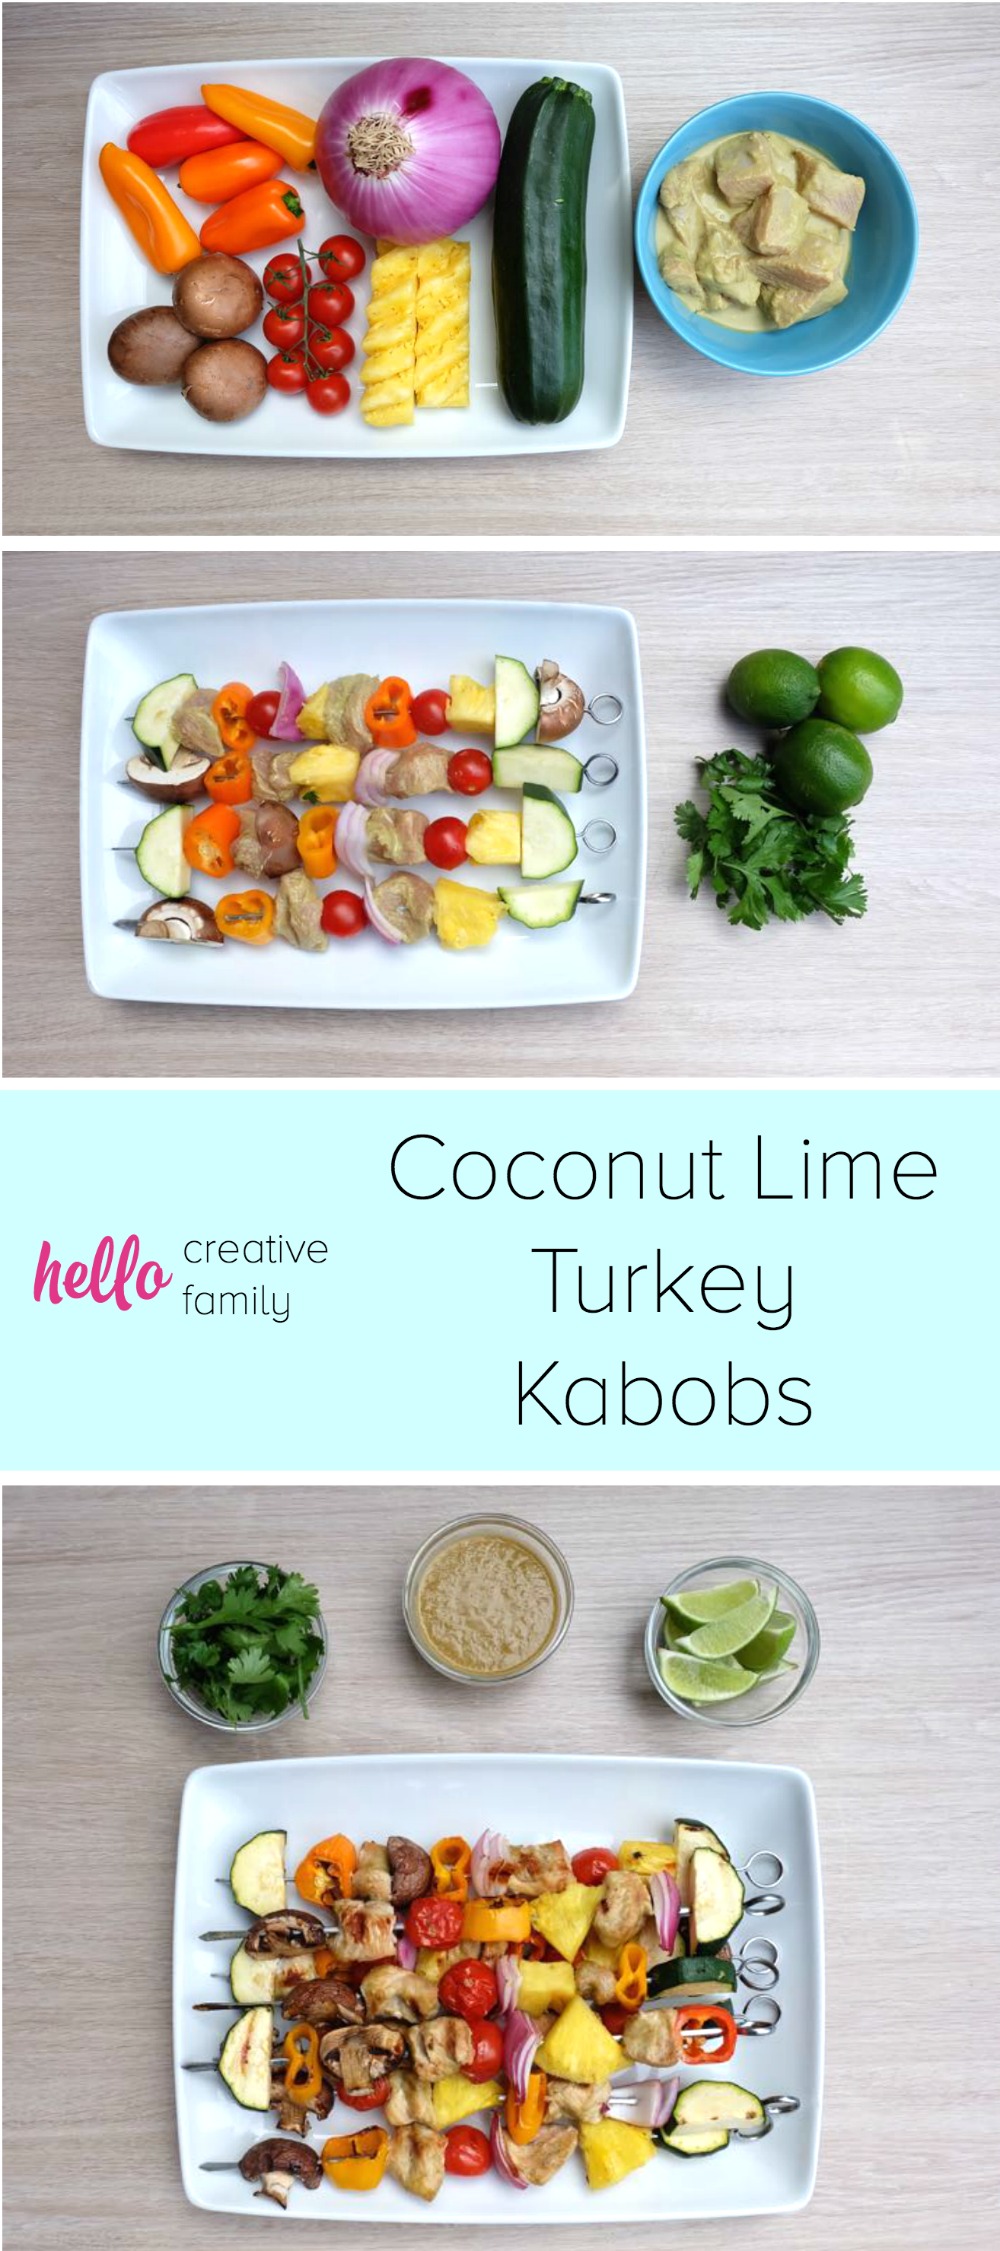 With flavors of lime, coconut, peanut and cilantro, this Coconut Lime Turkey Kabobs Recipe is a summer favorite. Throw it on the grill or BBQ and have a quick and easy dinner ready in minutes. Sure to be a family favorite.